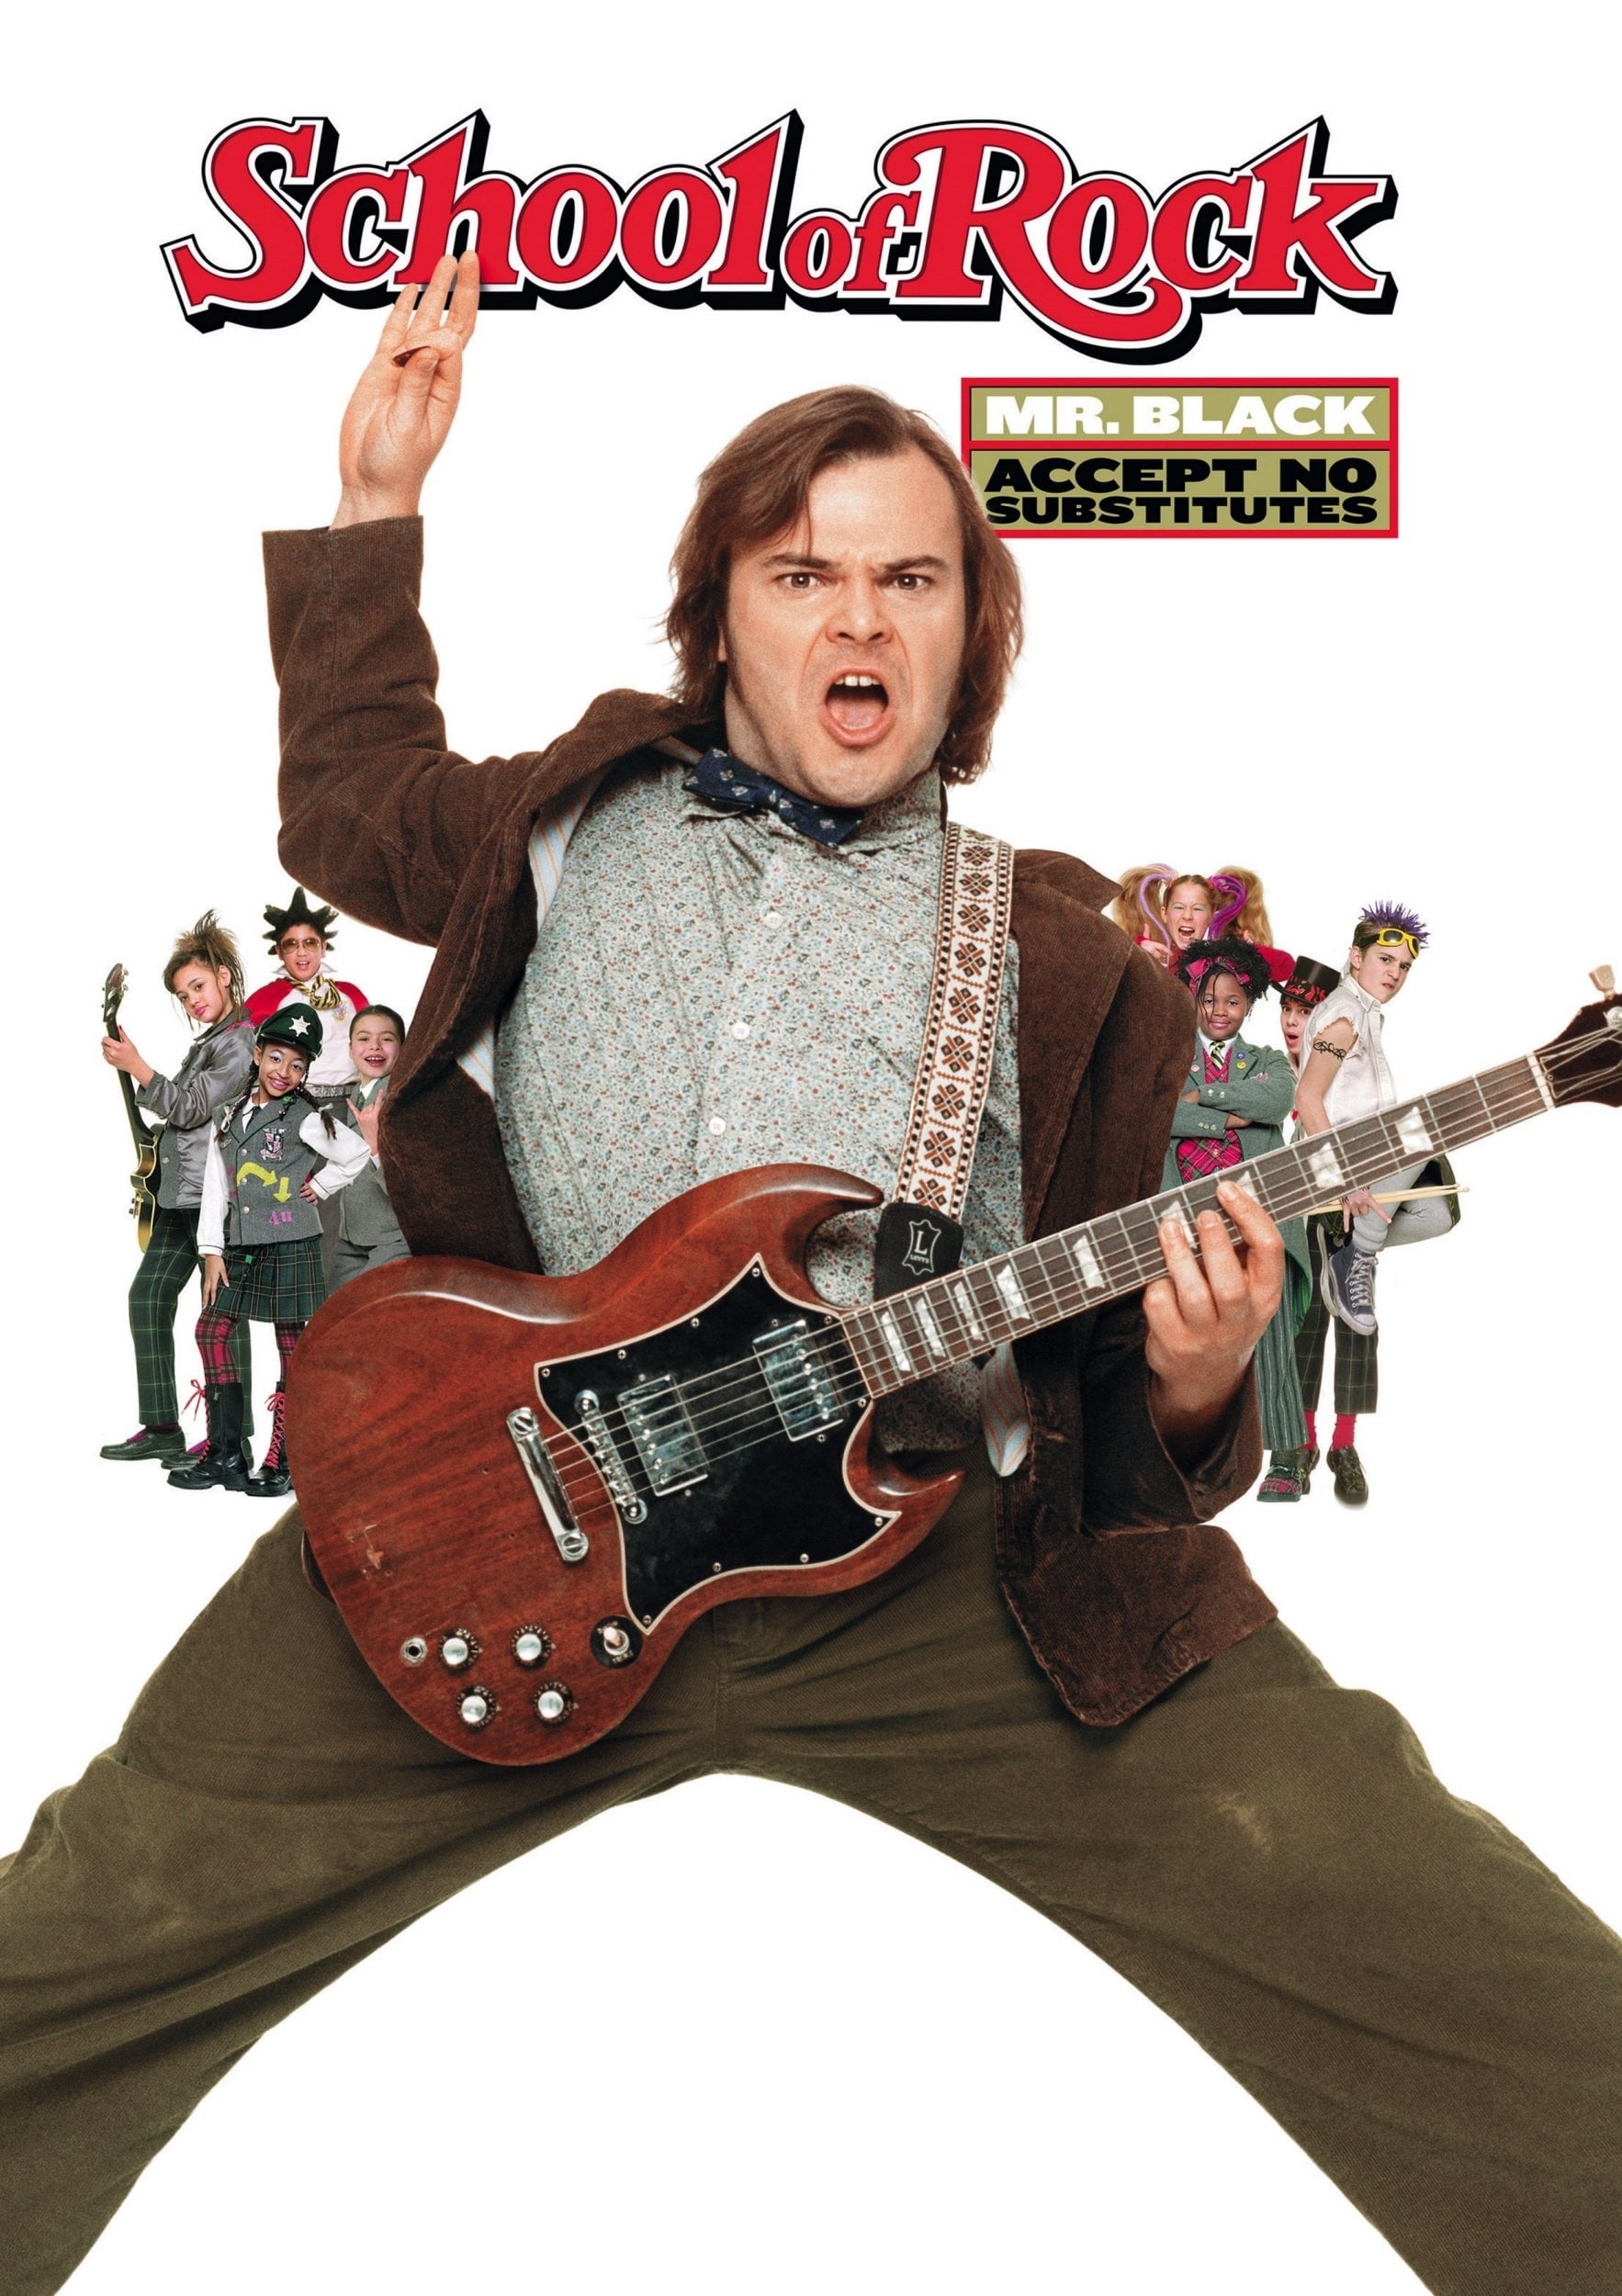 Jack Black on the cover of one of the great back to school movies School of Rock